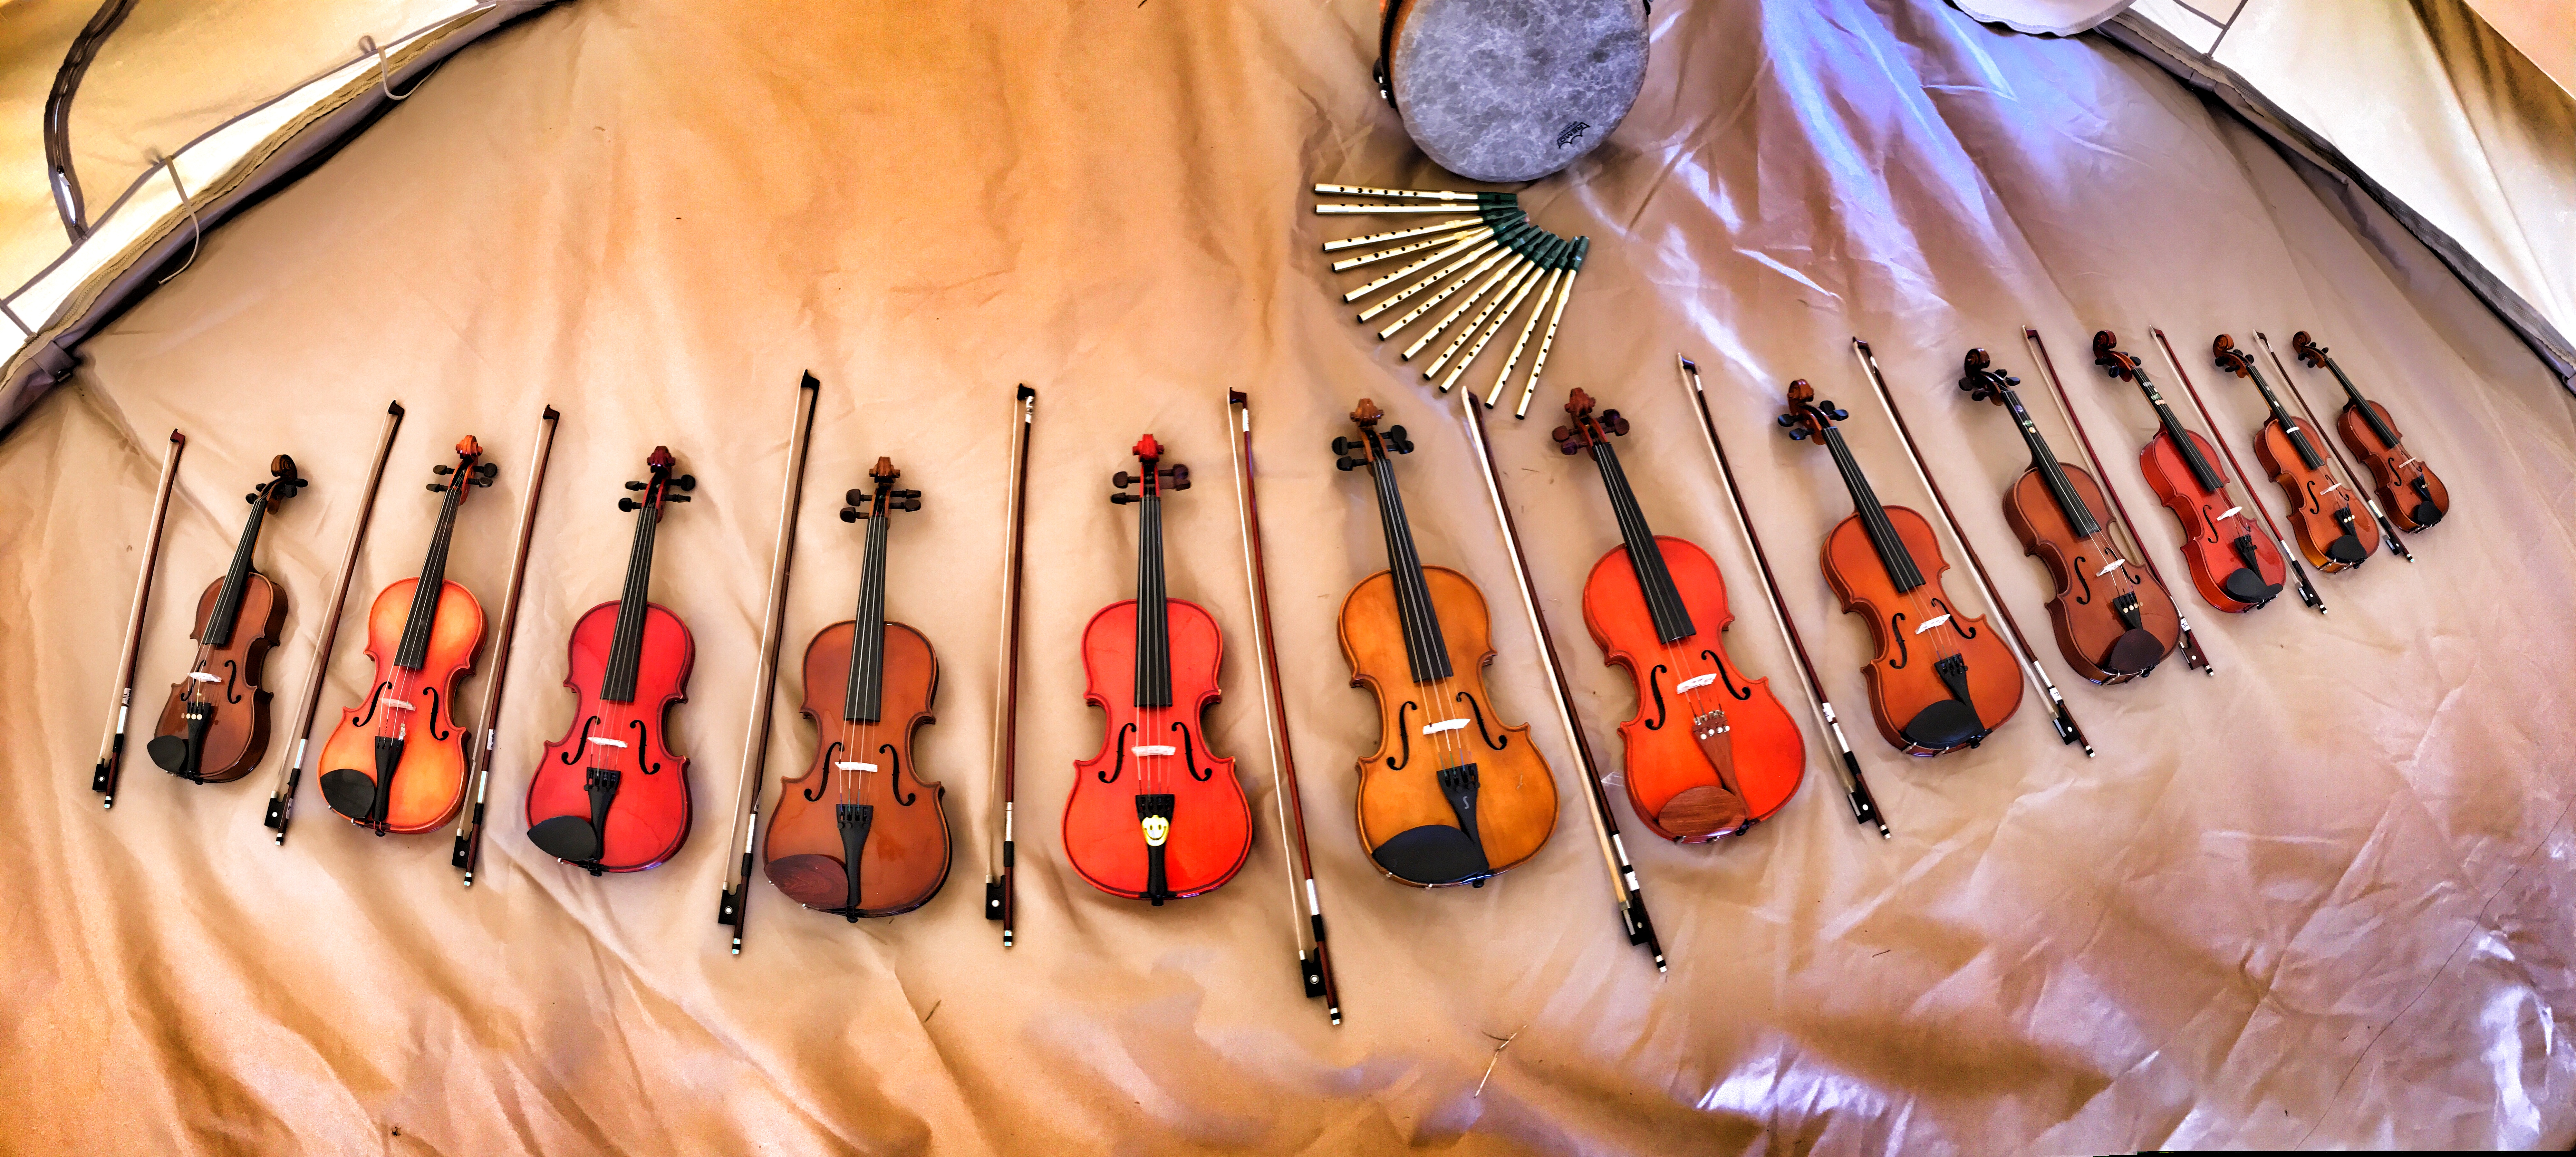 Lots of violins of different sizes